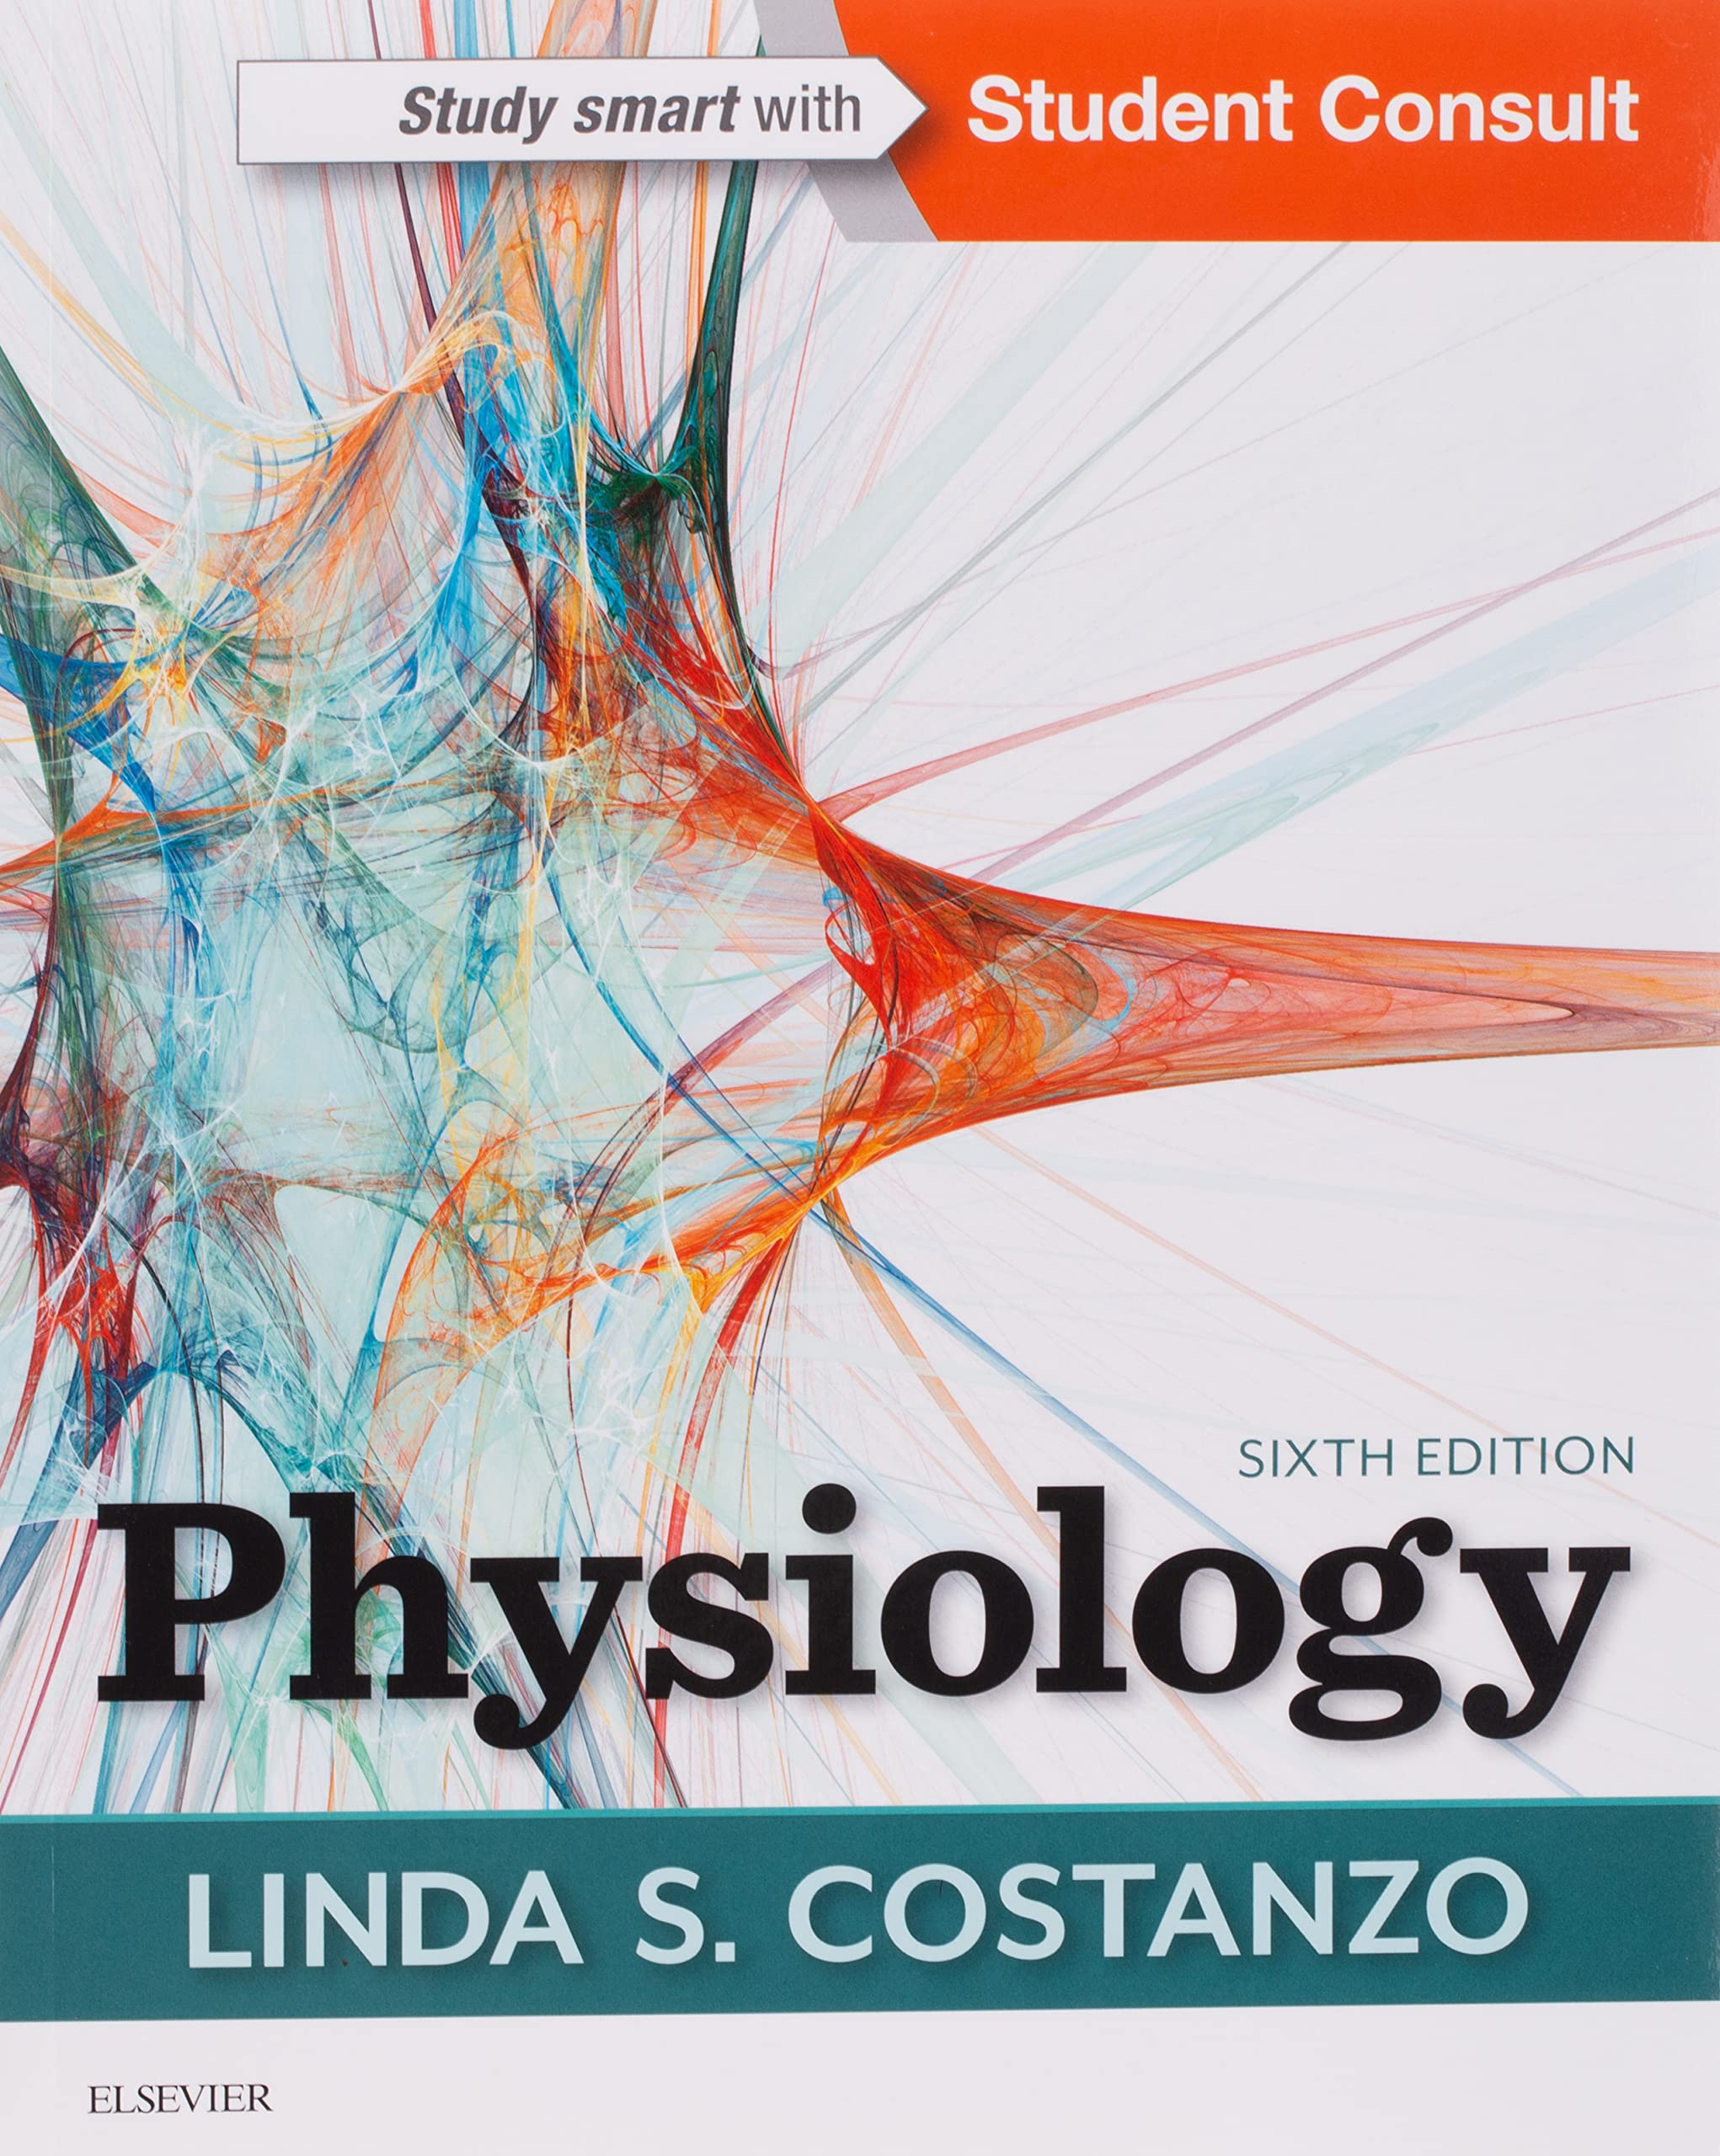 "Physiology" by Linda S. Costanzo